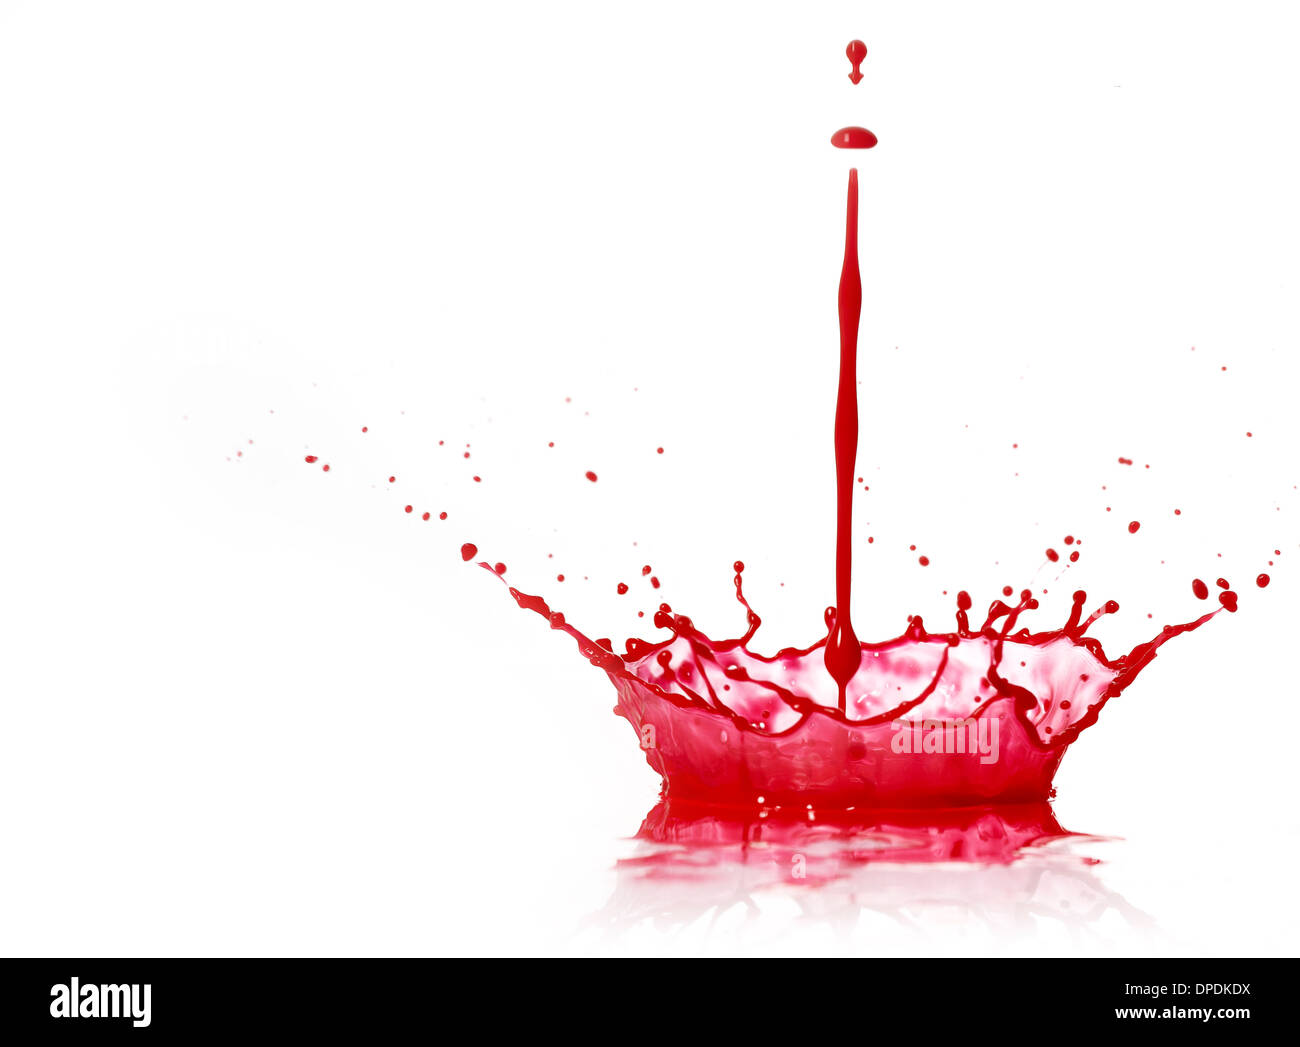 Red paint dropping creating a splash Stock Photo